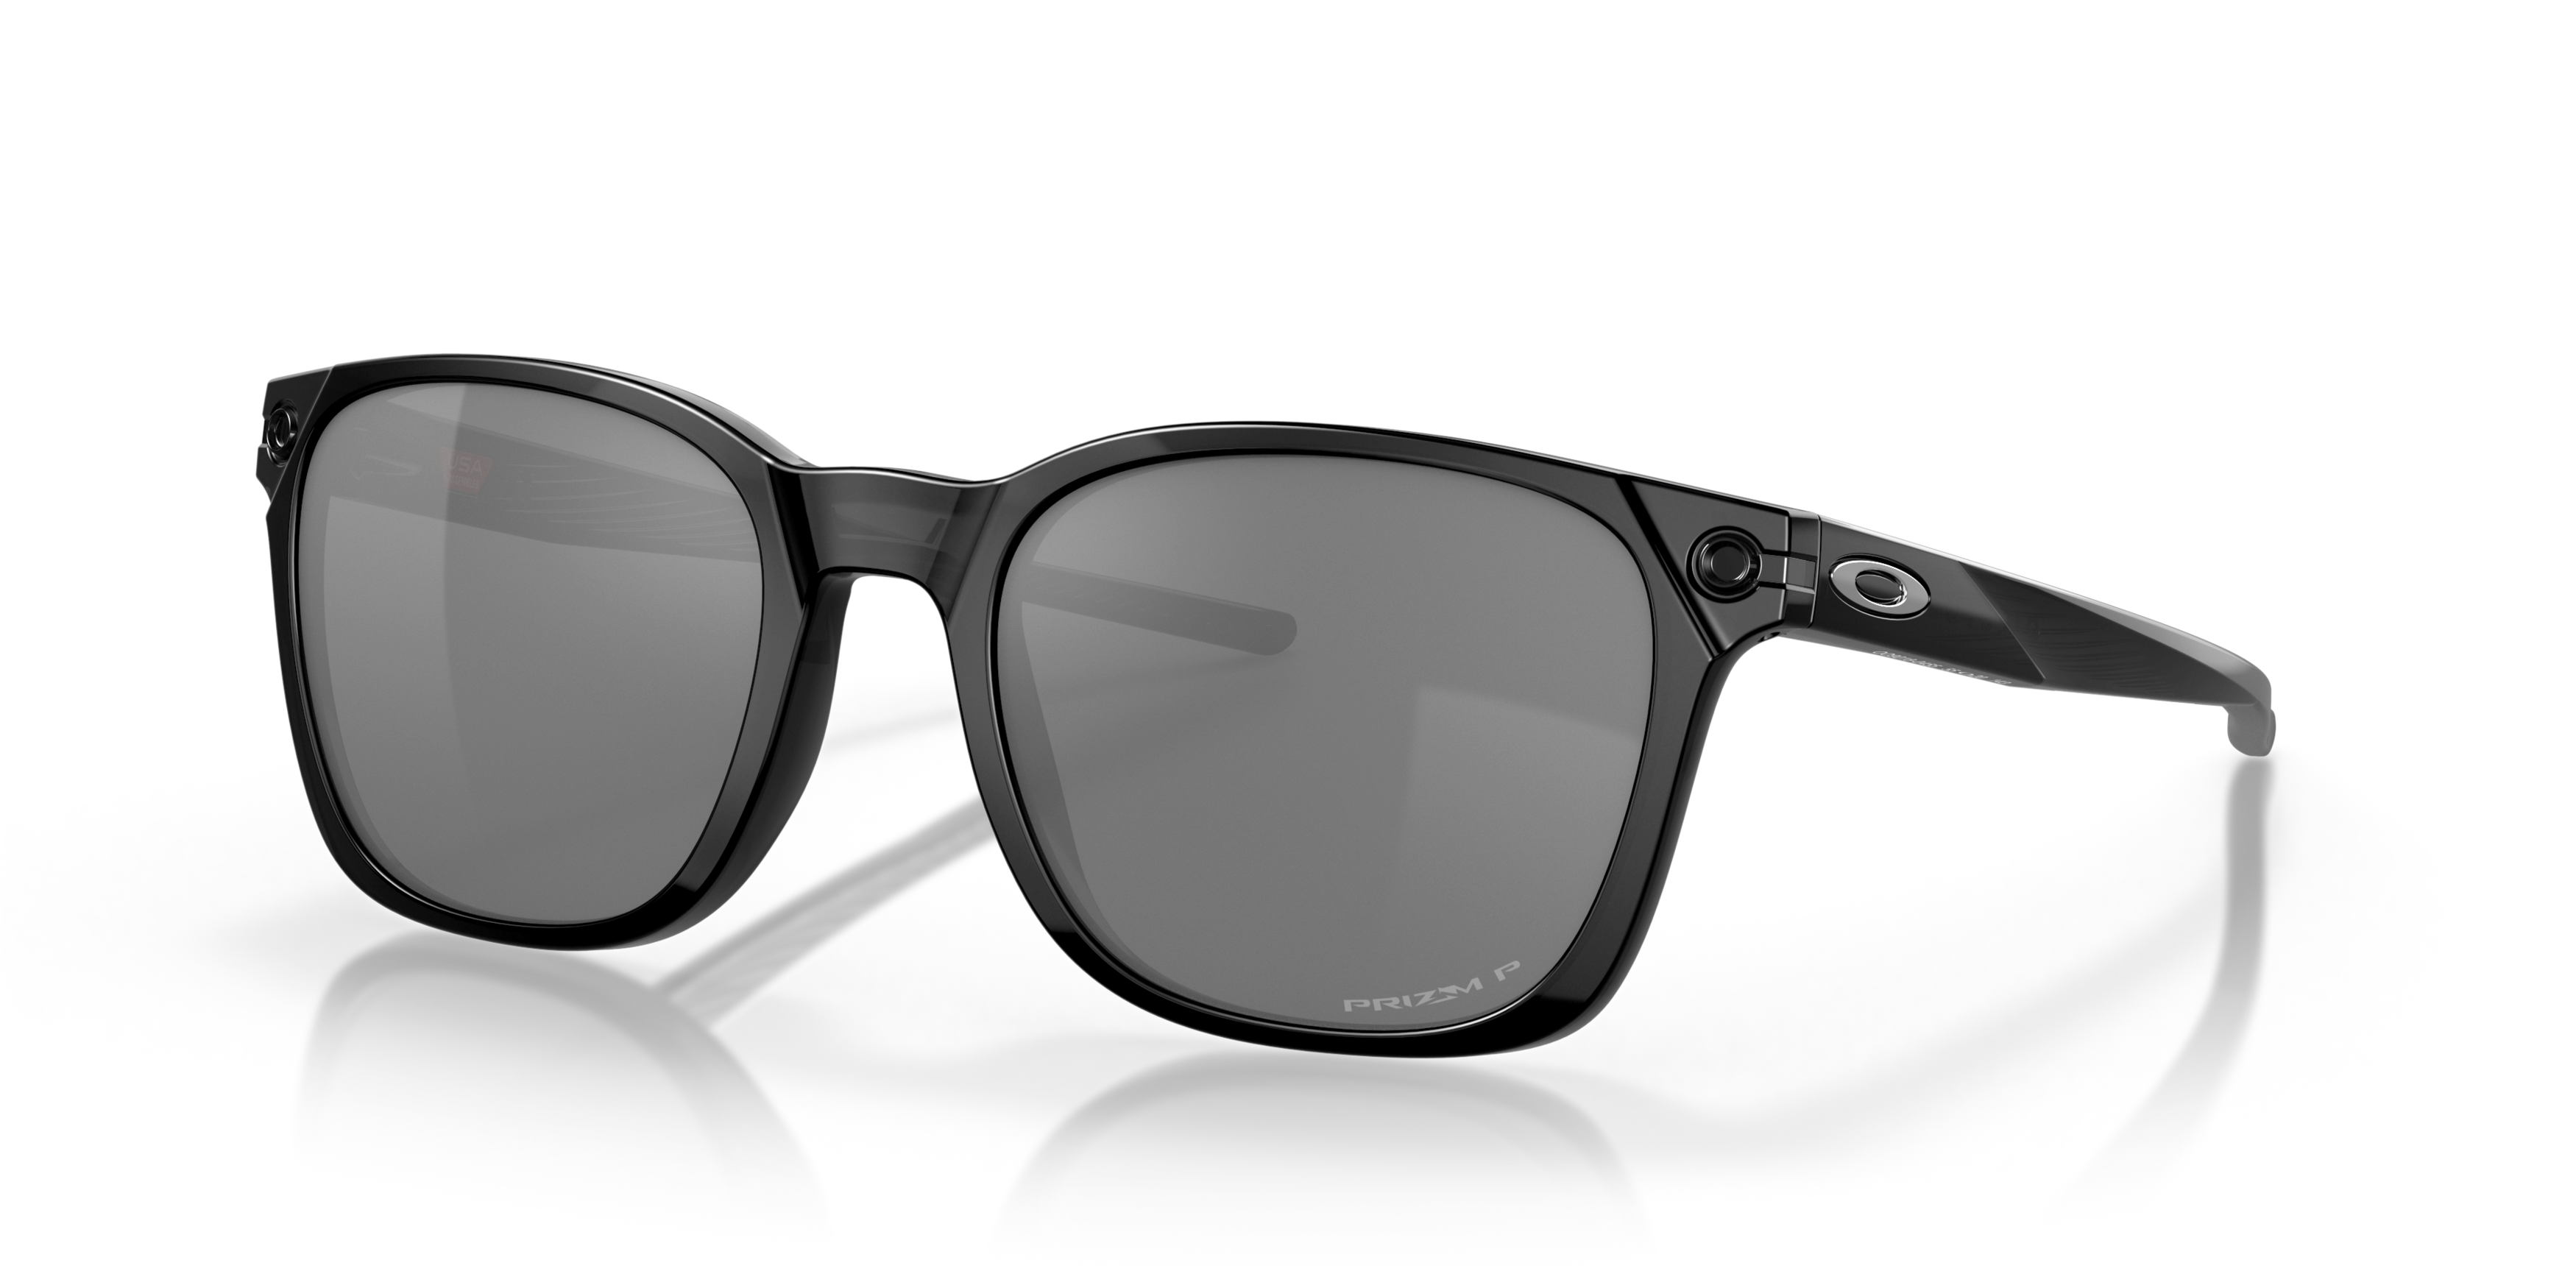 [products.image.angle_left01] Oakley 0OO9018 901804